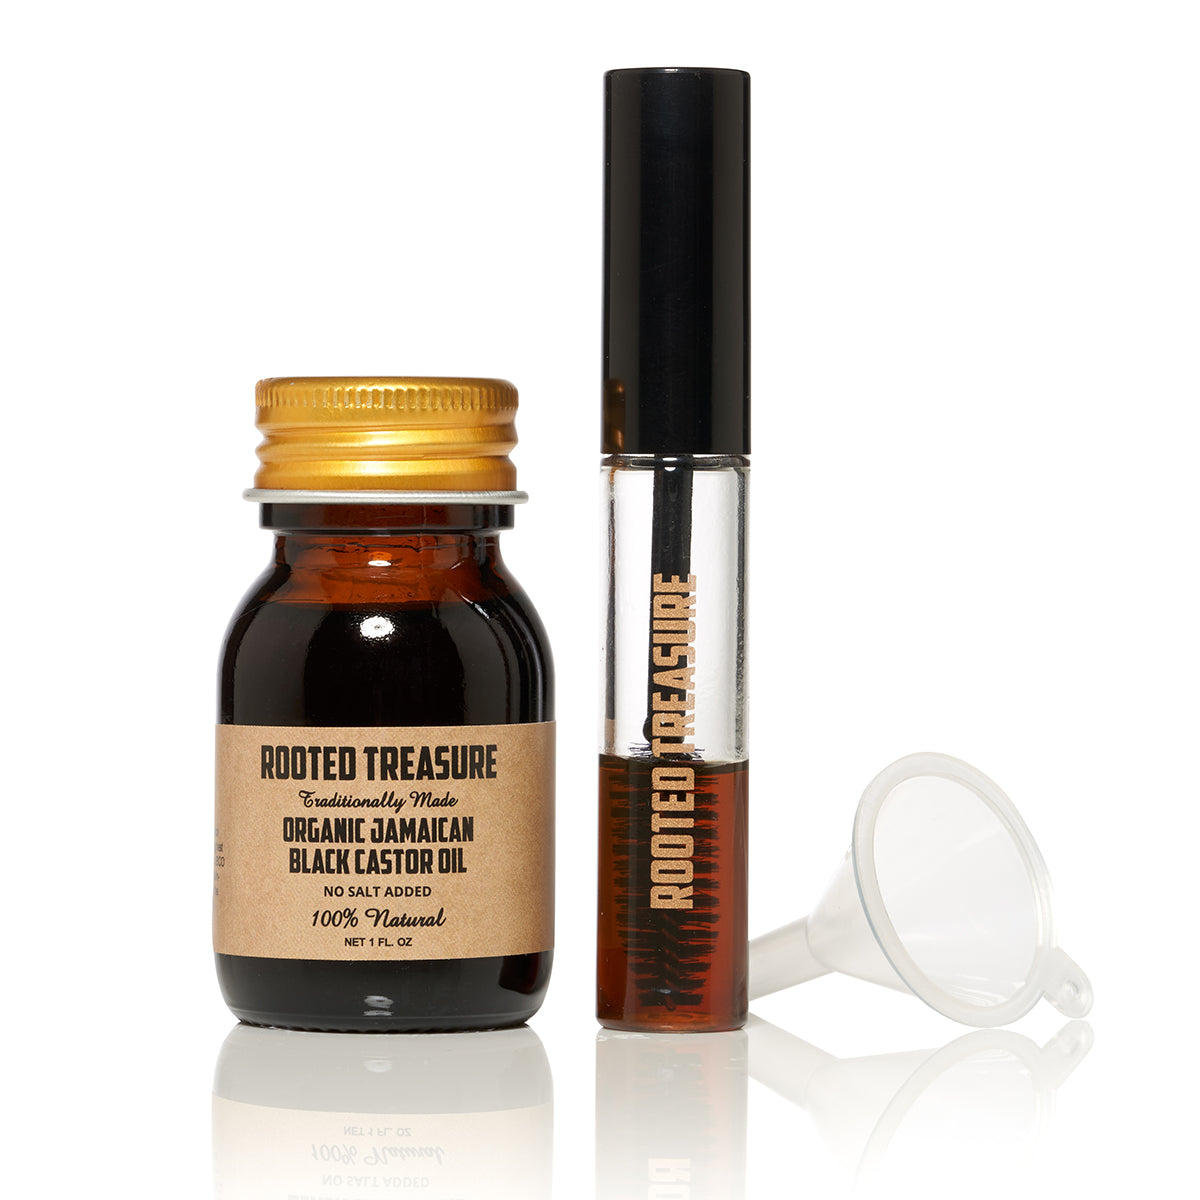 Rooted Treasure's Mascara Tube for Eyebrow and Edge Growth